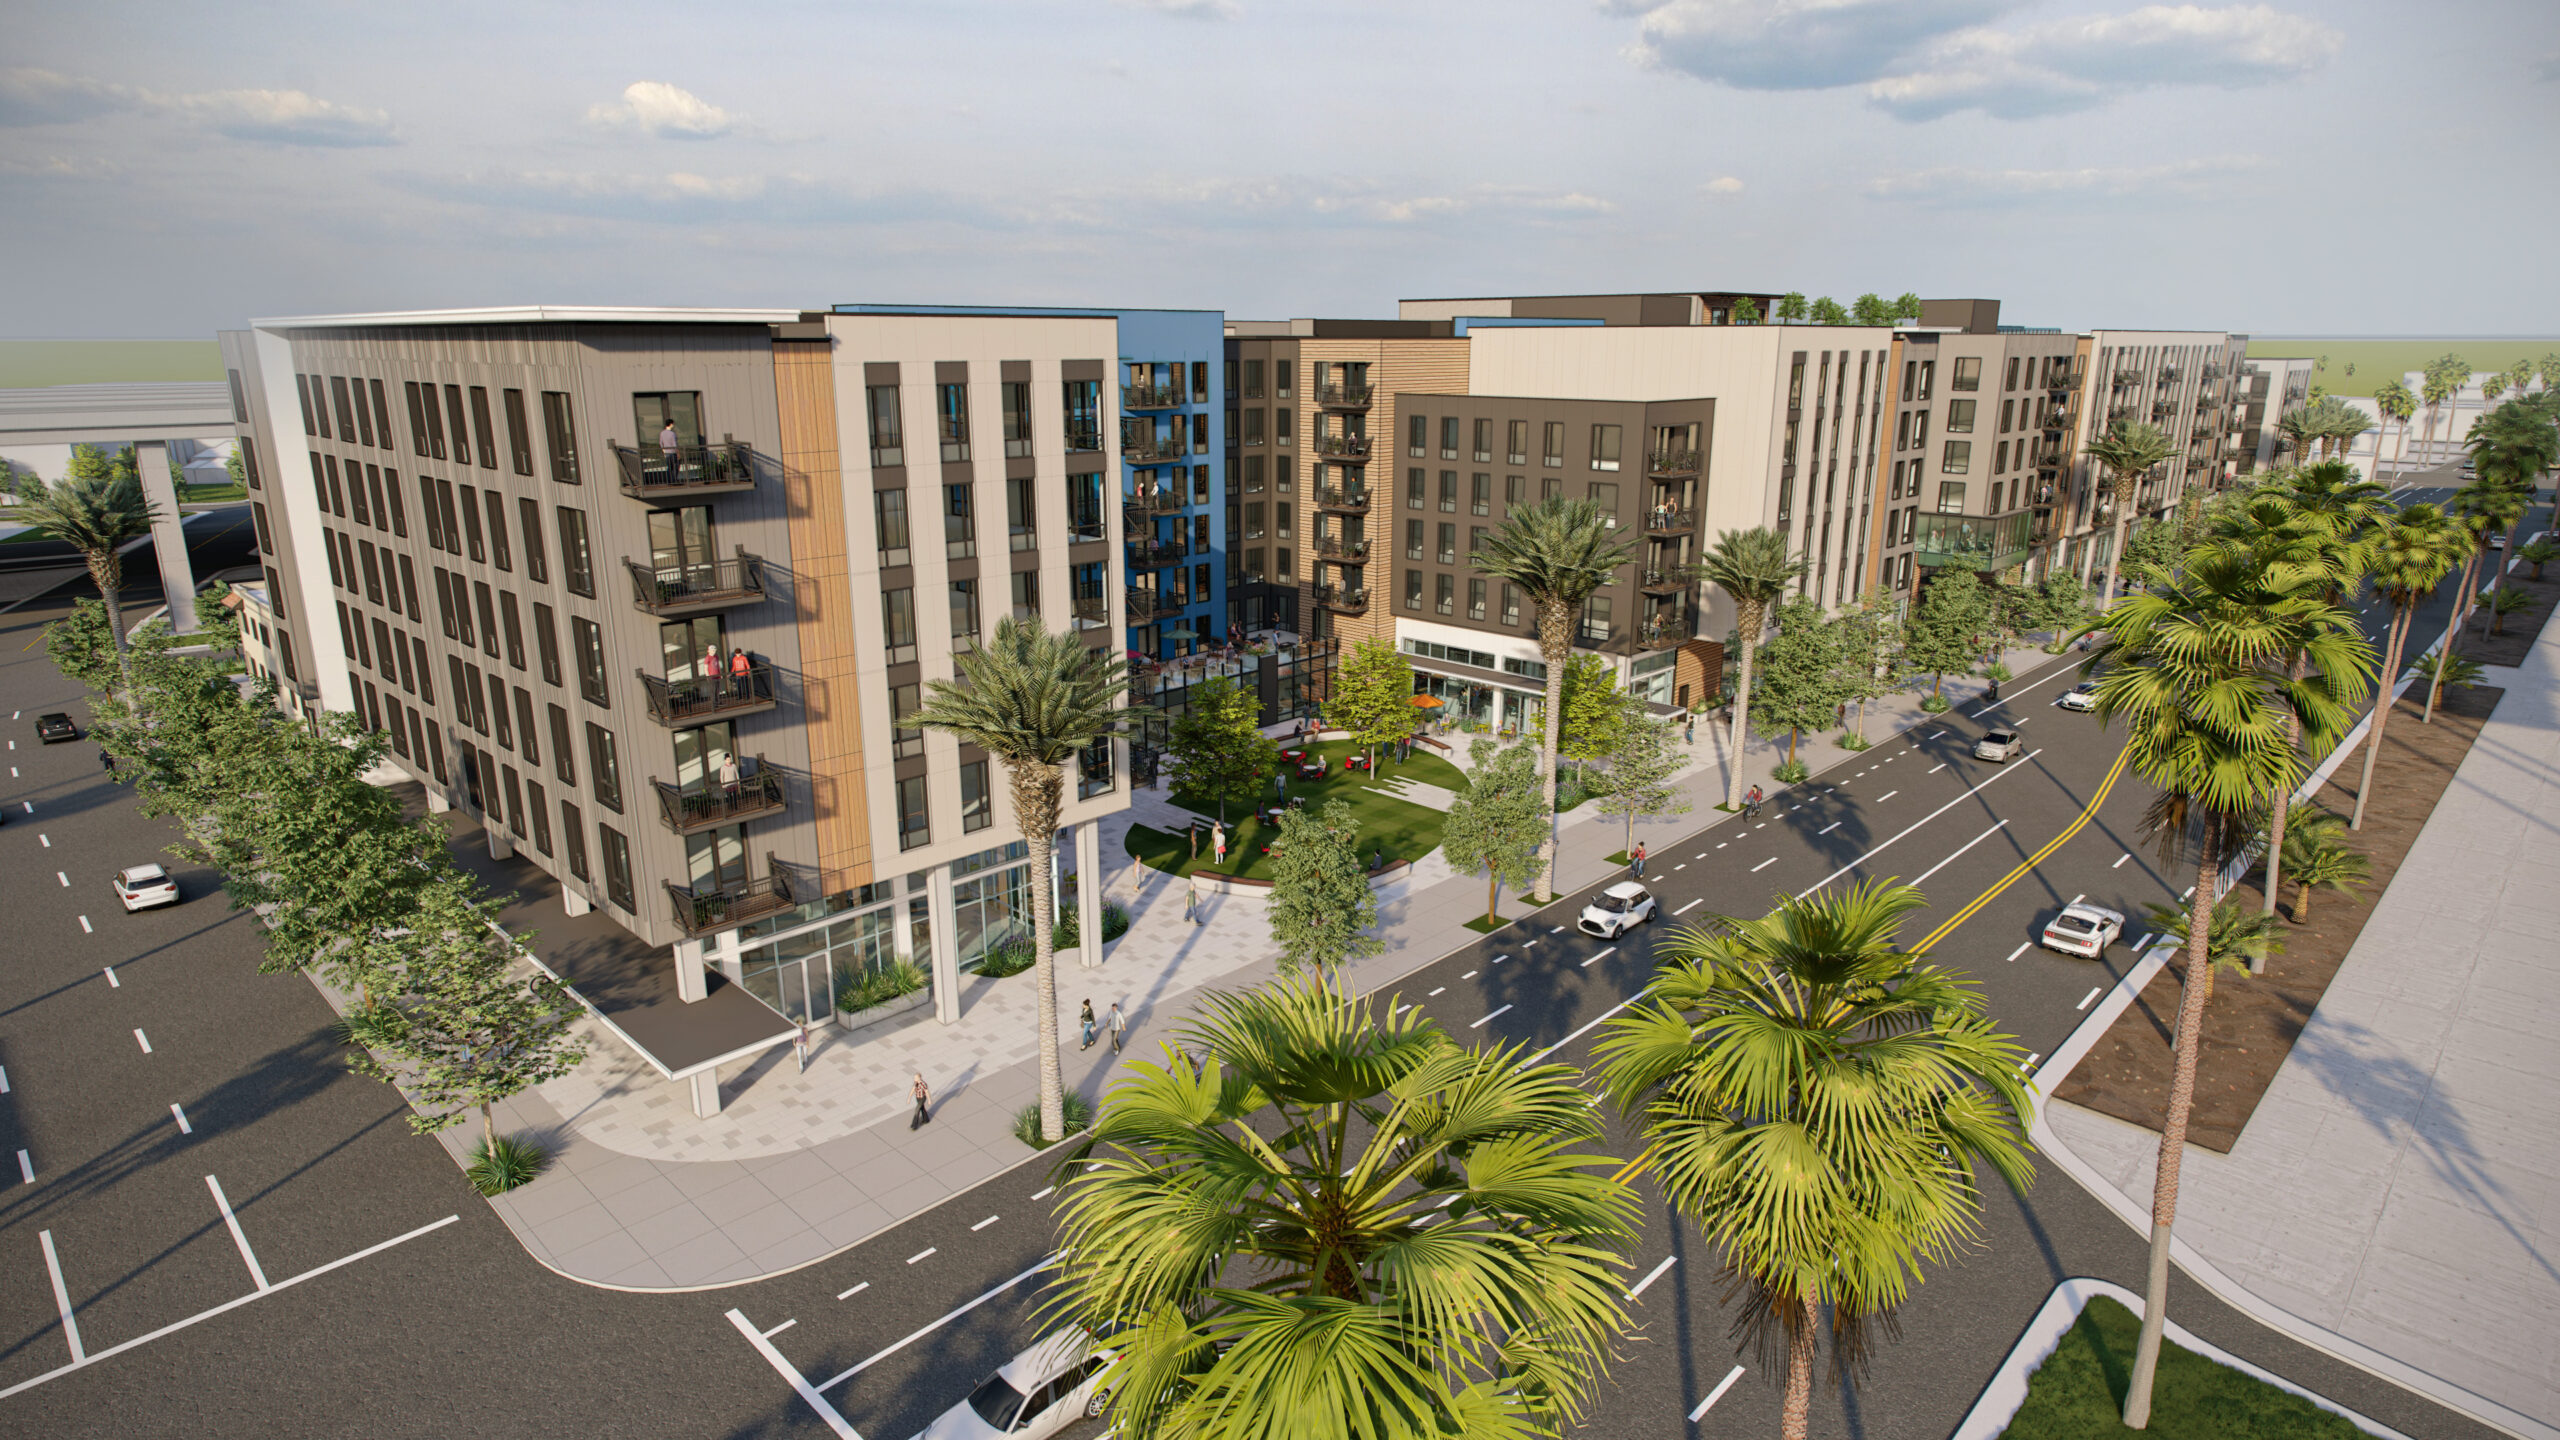 Landmark Properties to Develop Purpose-Built Residential Community to Serve University of Southern California Students